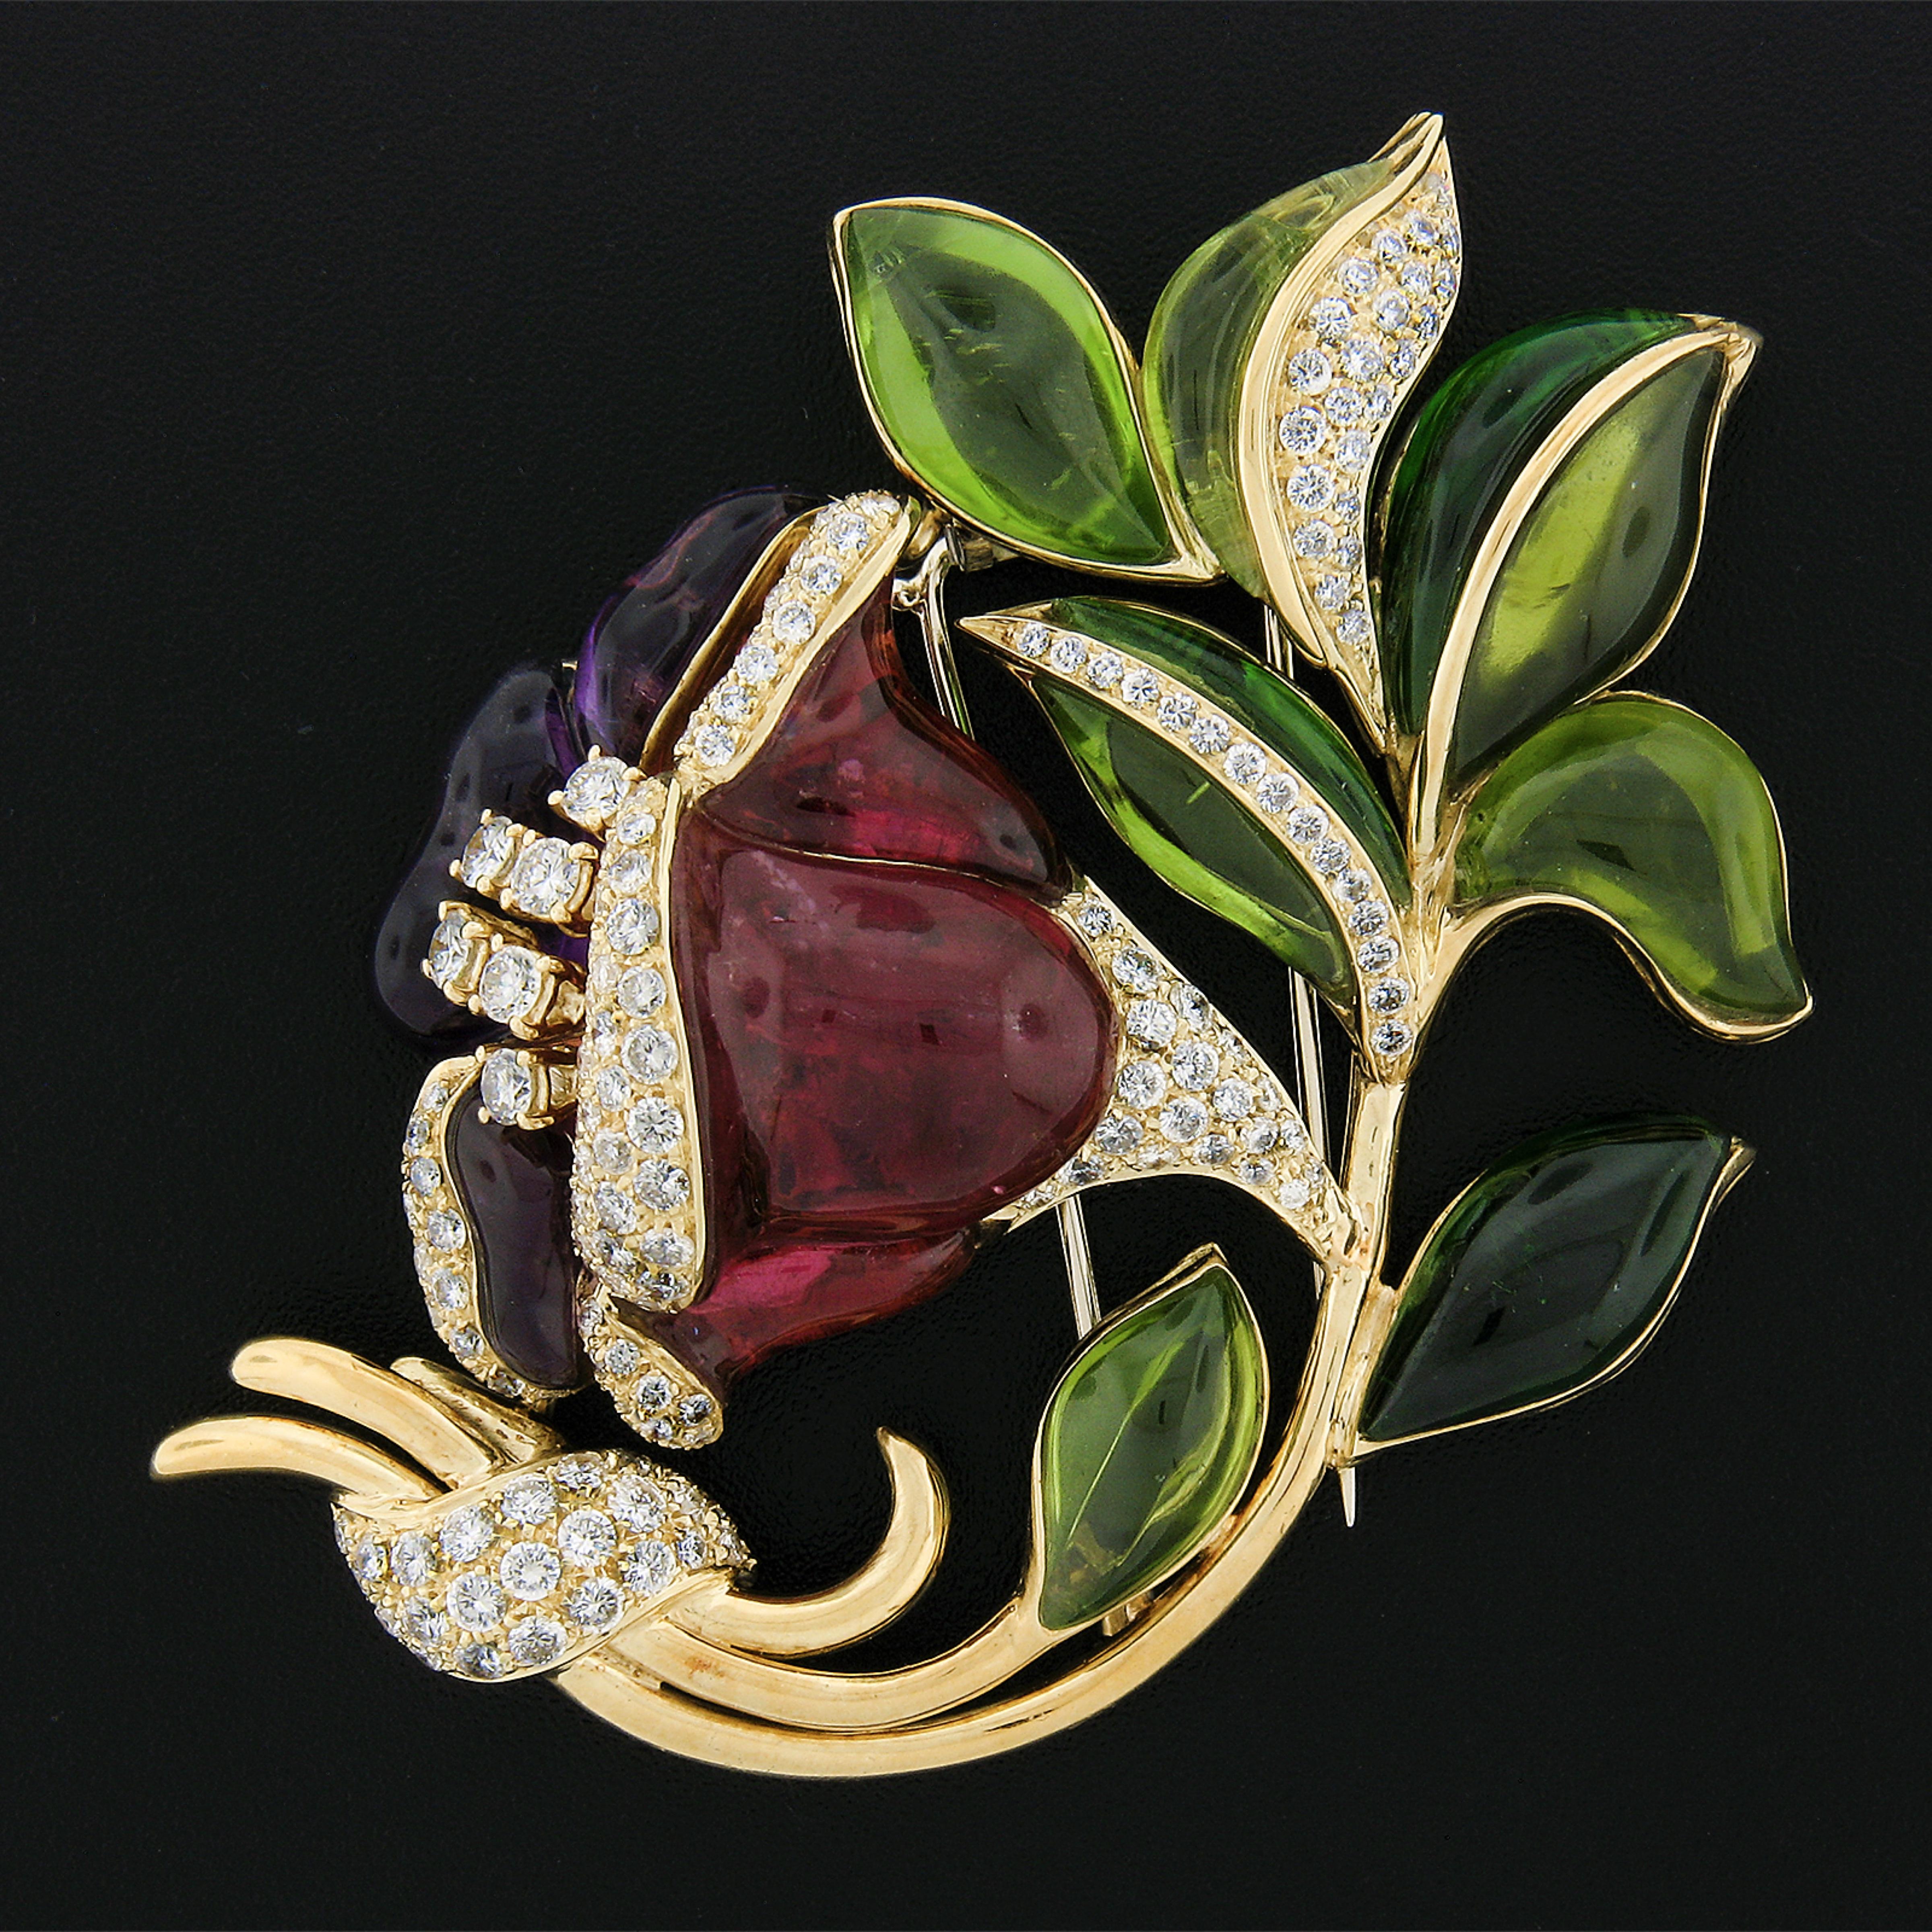 Here we have an absolutely breathtaking, all original, statement brooch crafted in solid 18k yellow gold and designed by Roberto Casarin. The gorgeous rose flower is structured from custom cut vivid pink tourmaline and deep purple amethyst stones,